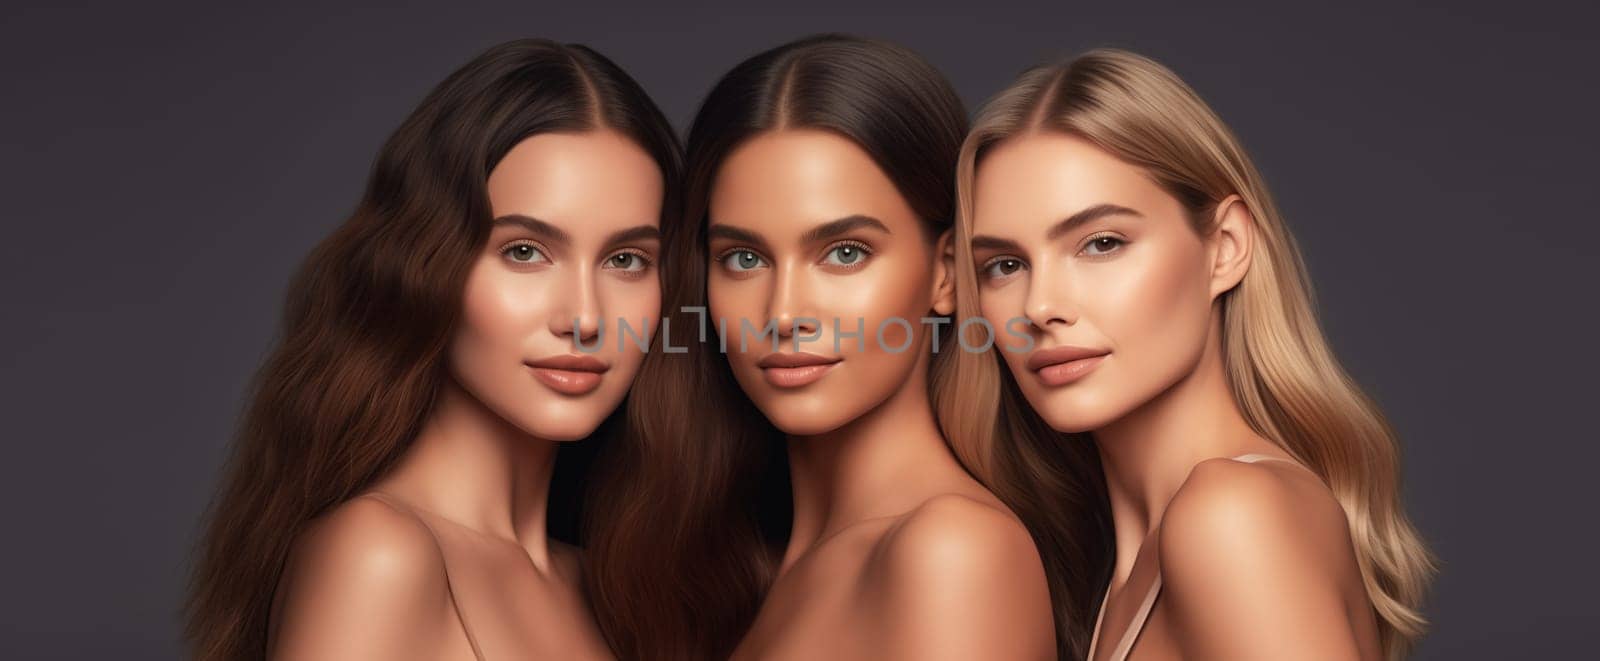 Beauty portrait of three diverse young women with clean healthy skin, beautiful lovely female models posing together on studio background